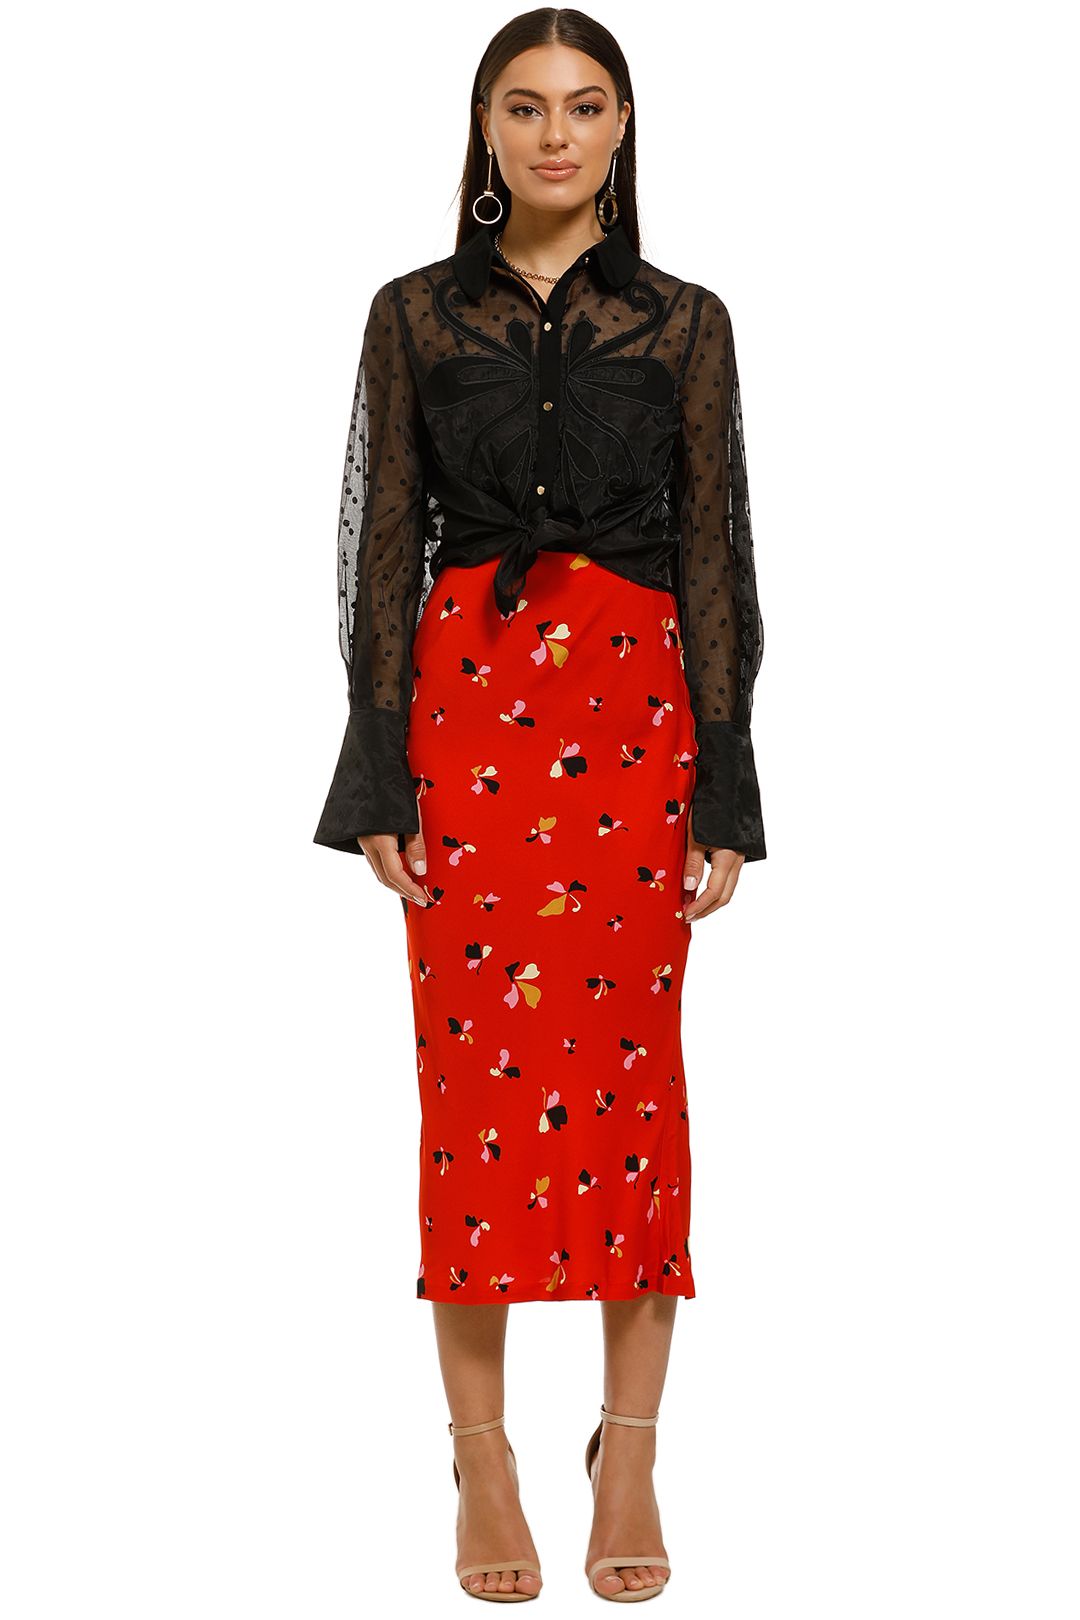 Rebecca-Vallance-Ruby-Skirt-Red-Print-Front